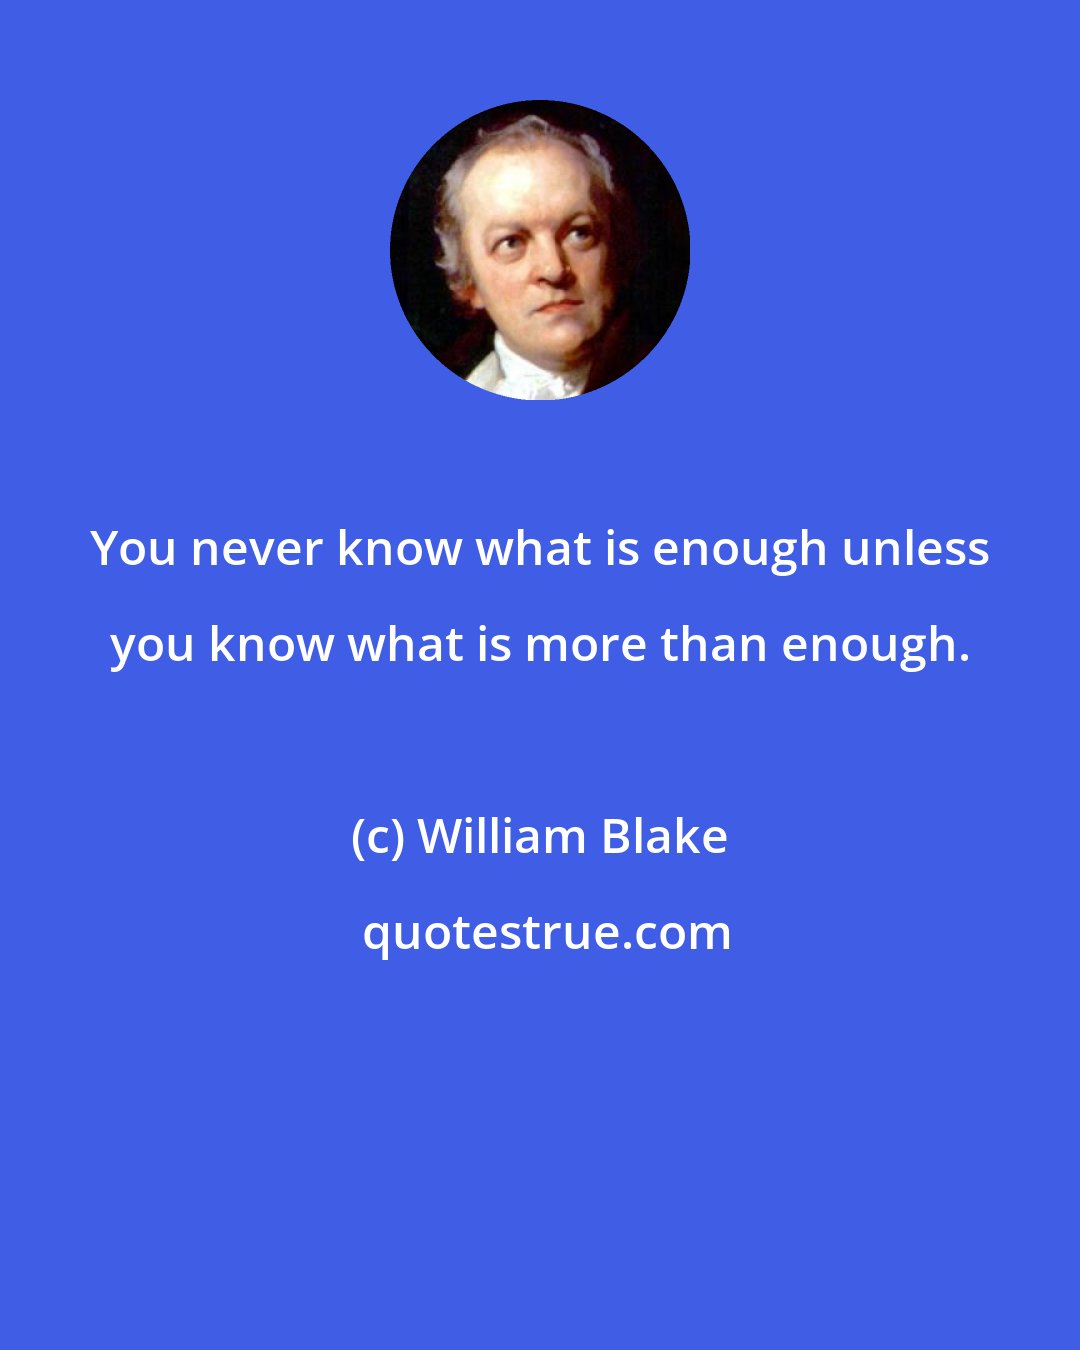 William Blake: You never know what is enough unless you know what is more than enough.